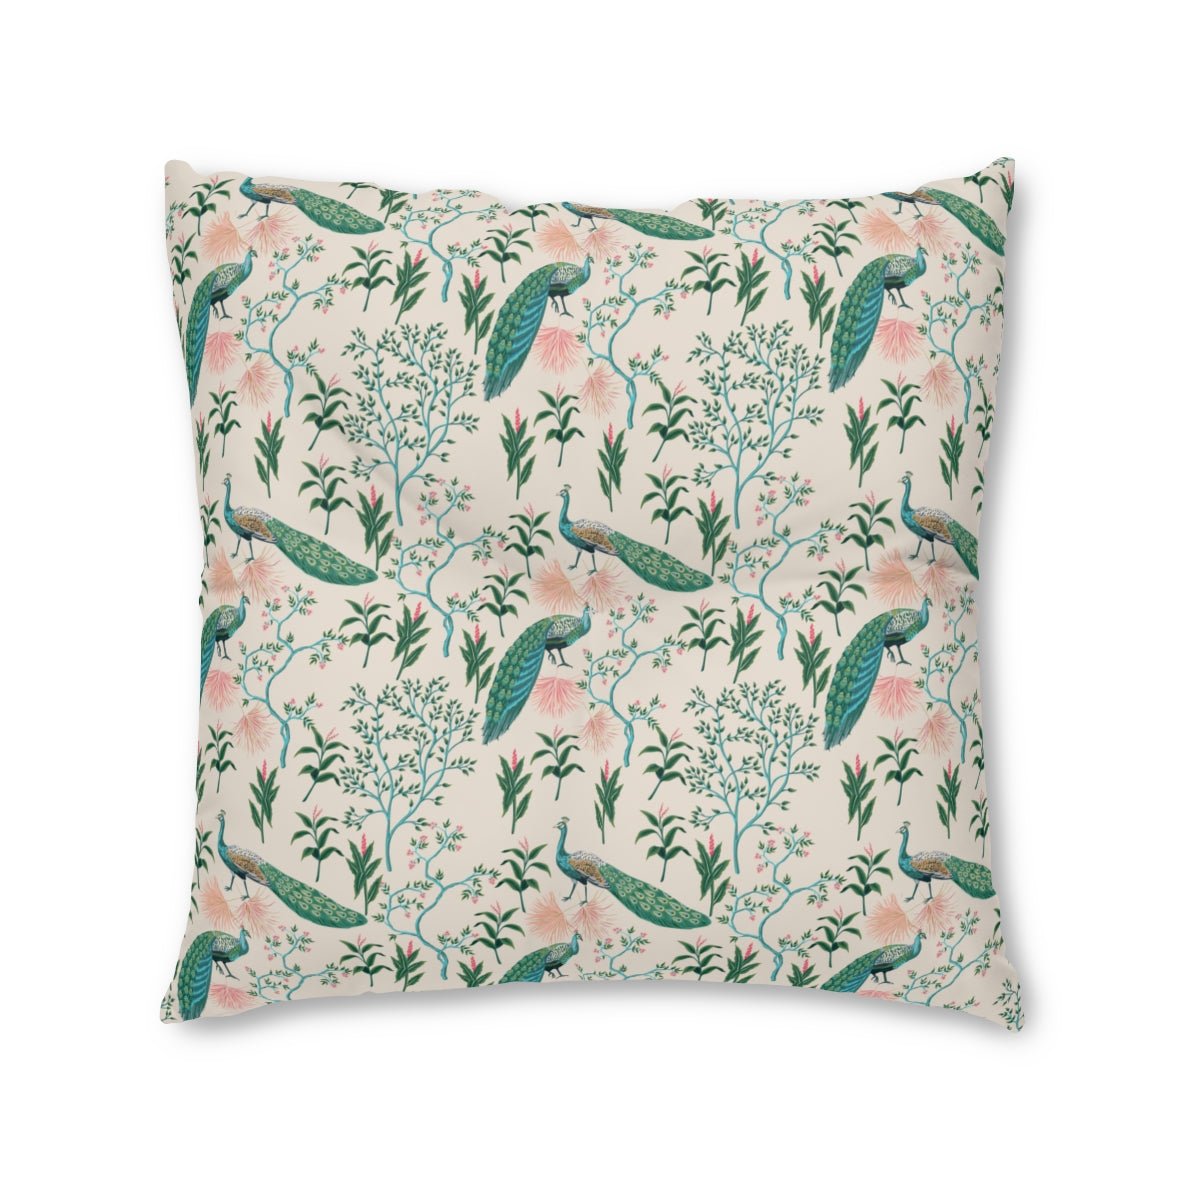 Chinoiserie Peacocks Tufted Square Floor Pillow - Puffin Lime